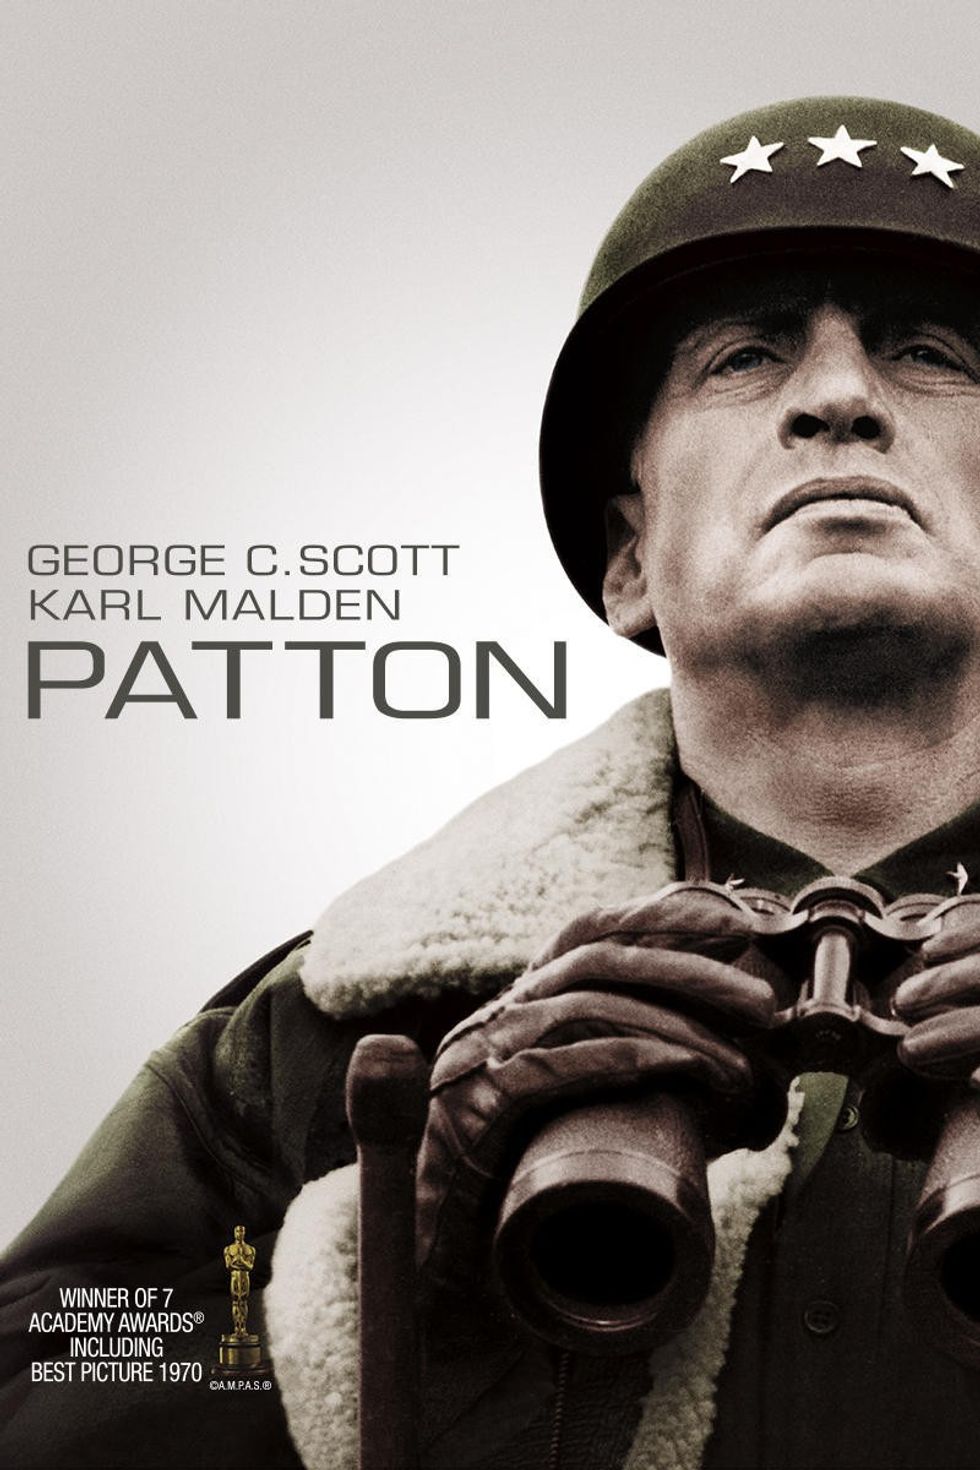 The Road to ‘Patton’